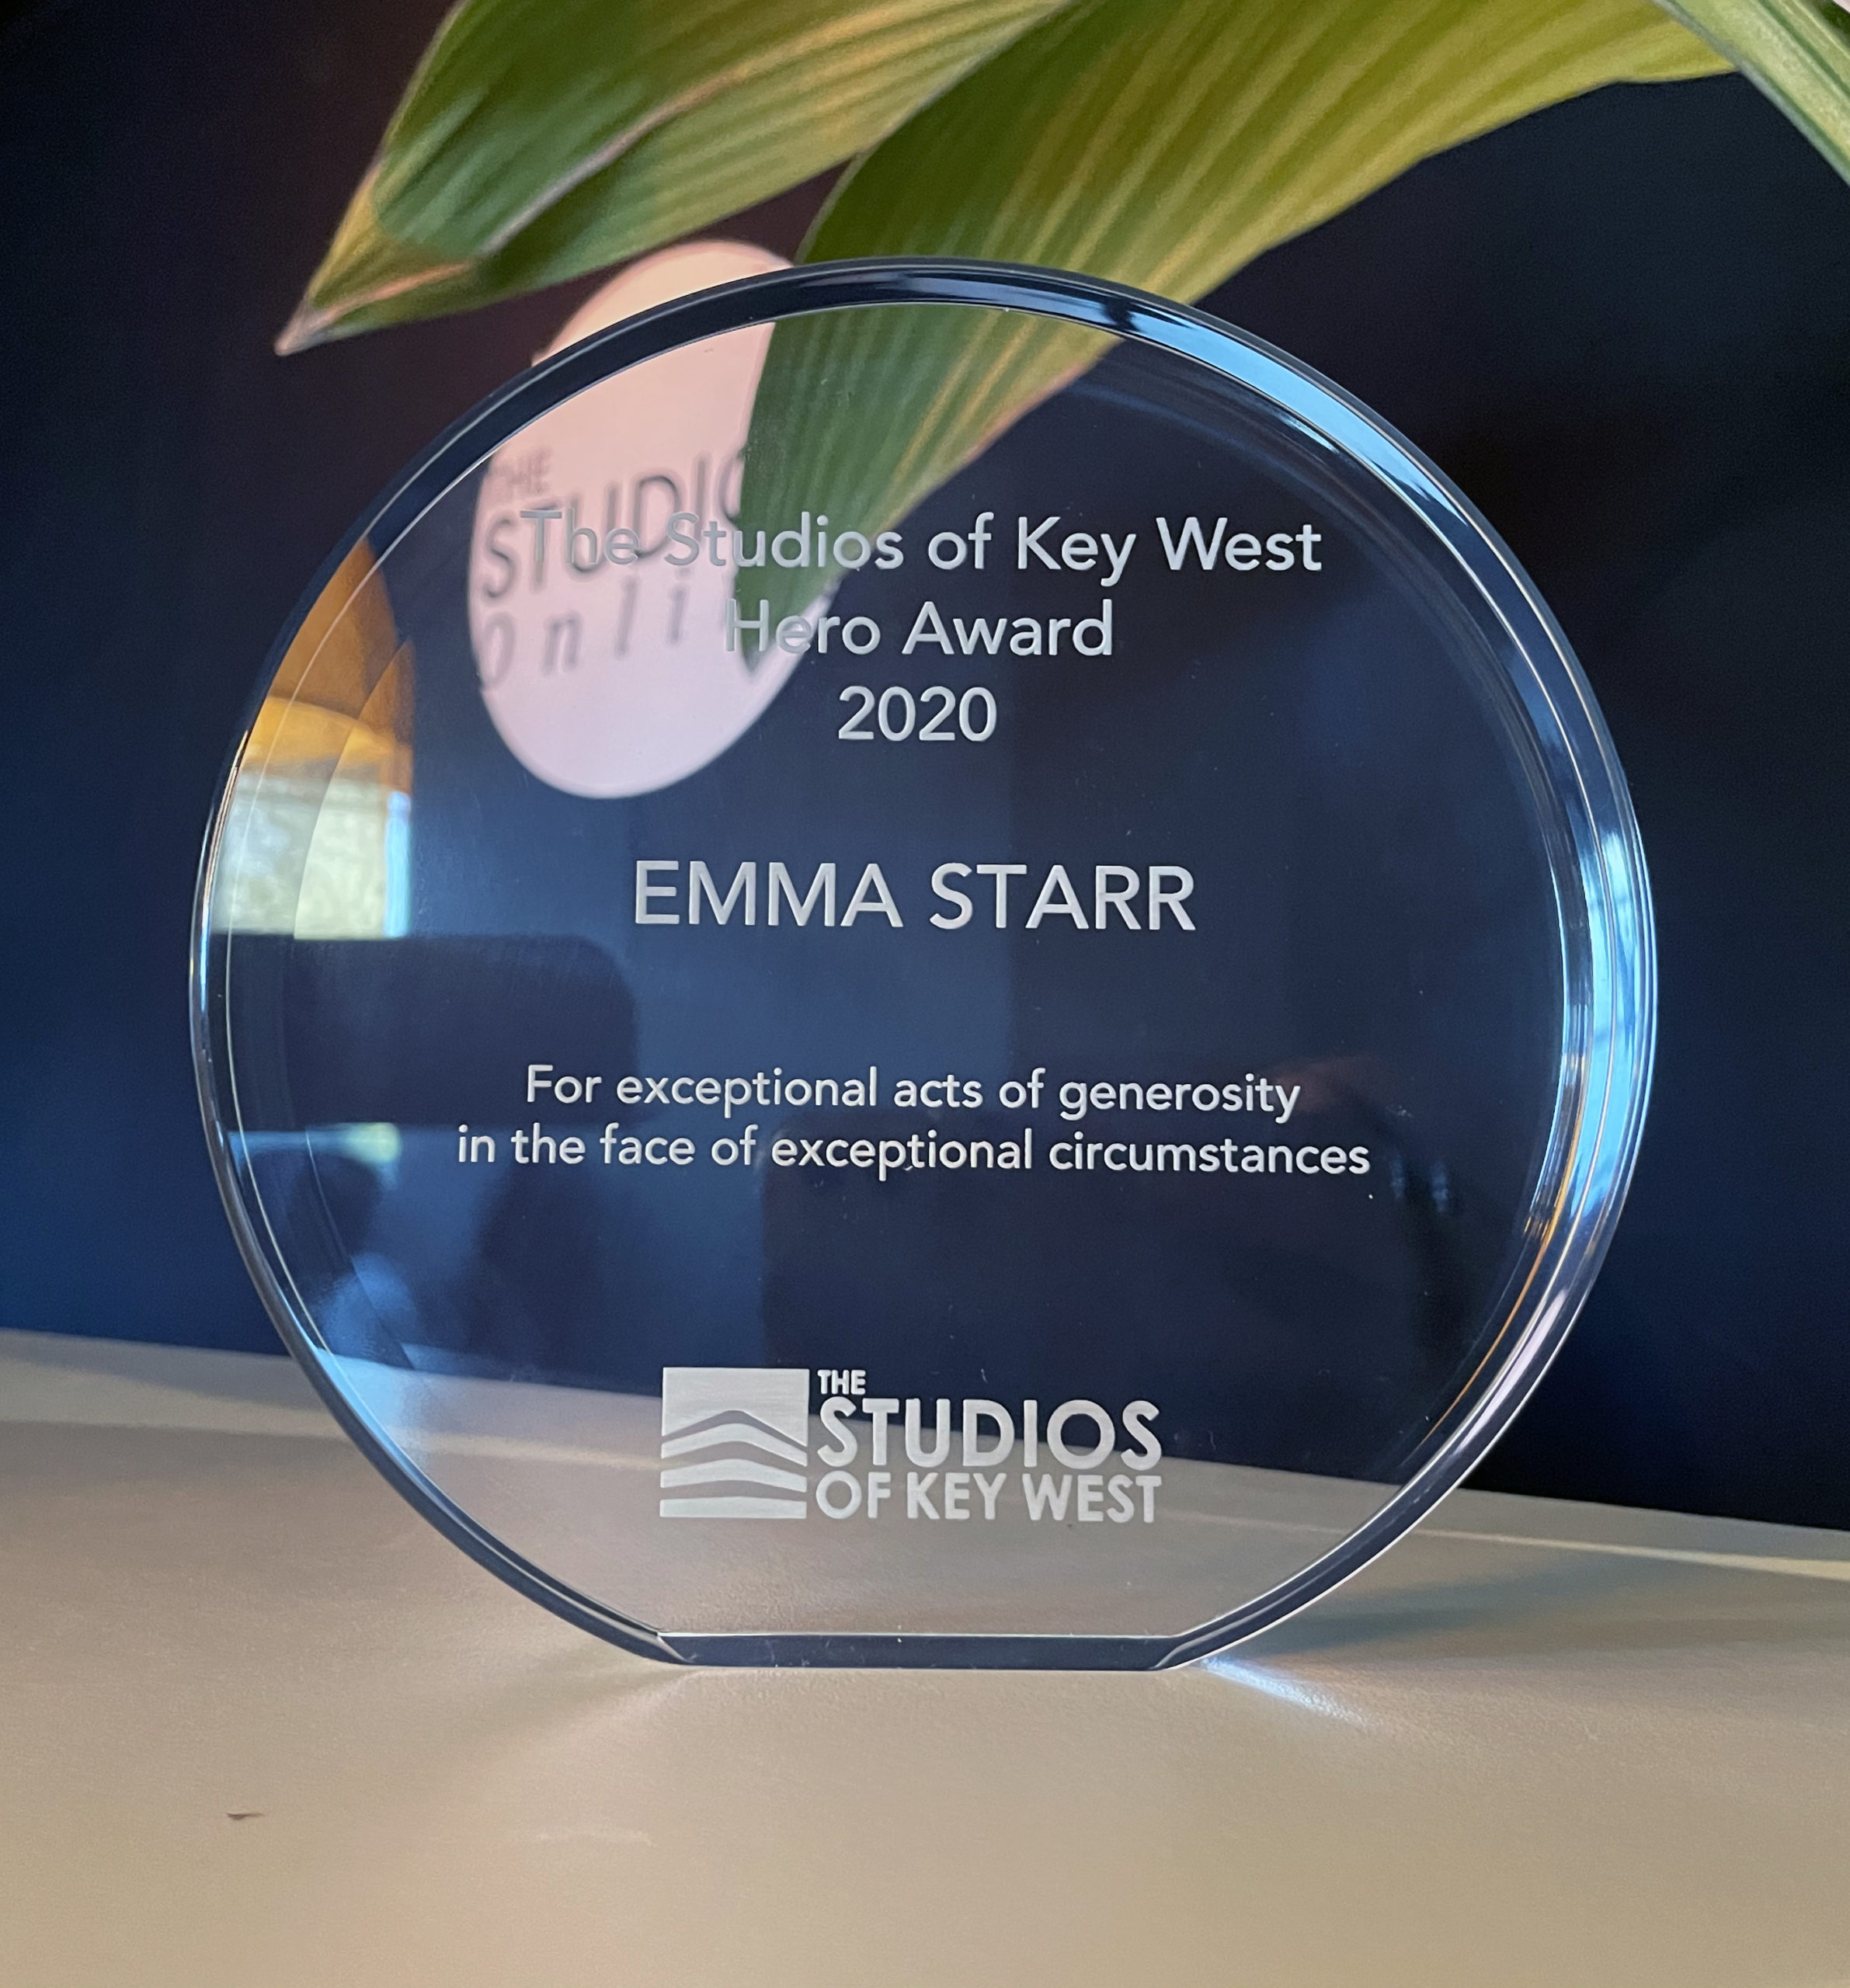 Emma Starr's award from the Studios of Key West